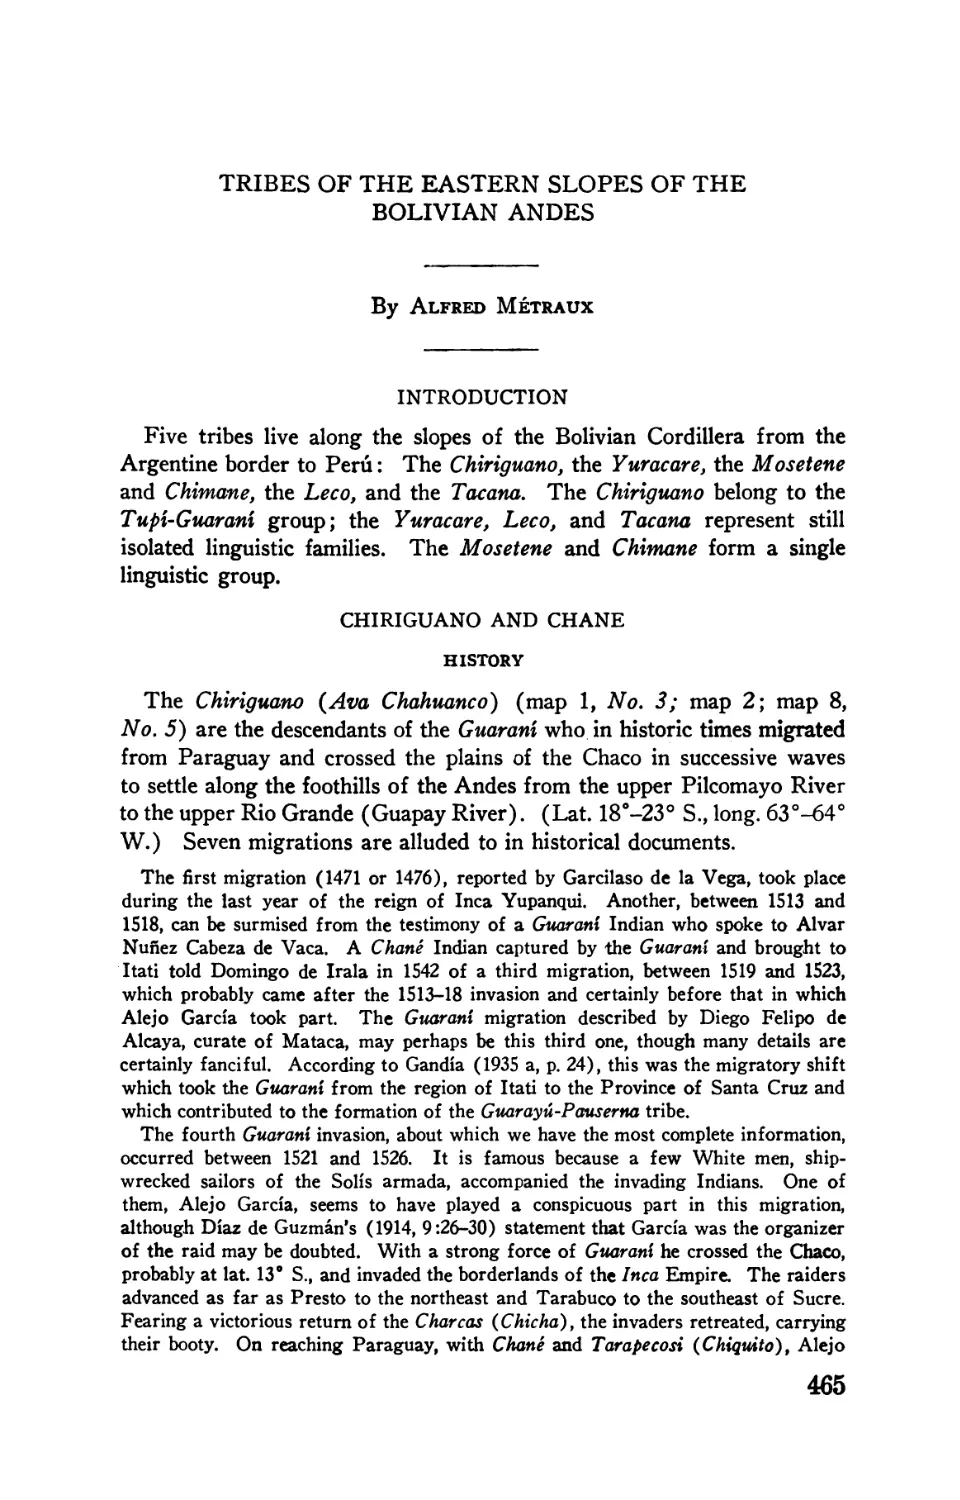 Tribes of the eastern slopes of the Bolivian Andes, by Alfred Métraux
Chiriguano and Chañé